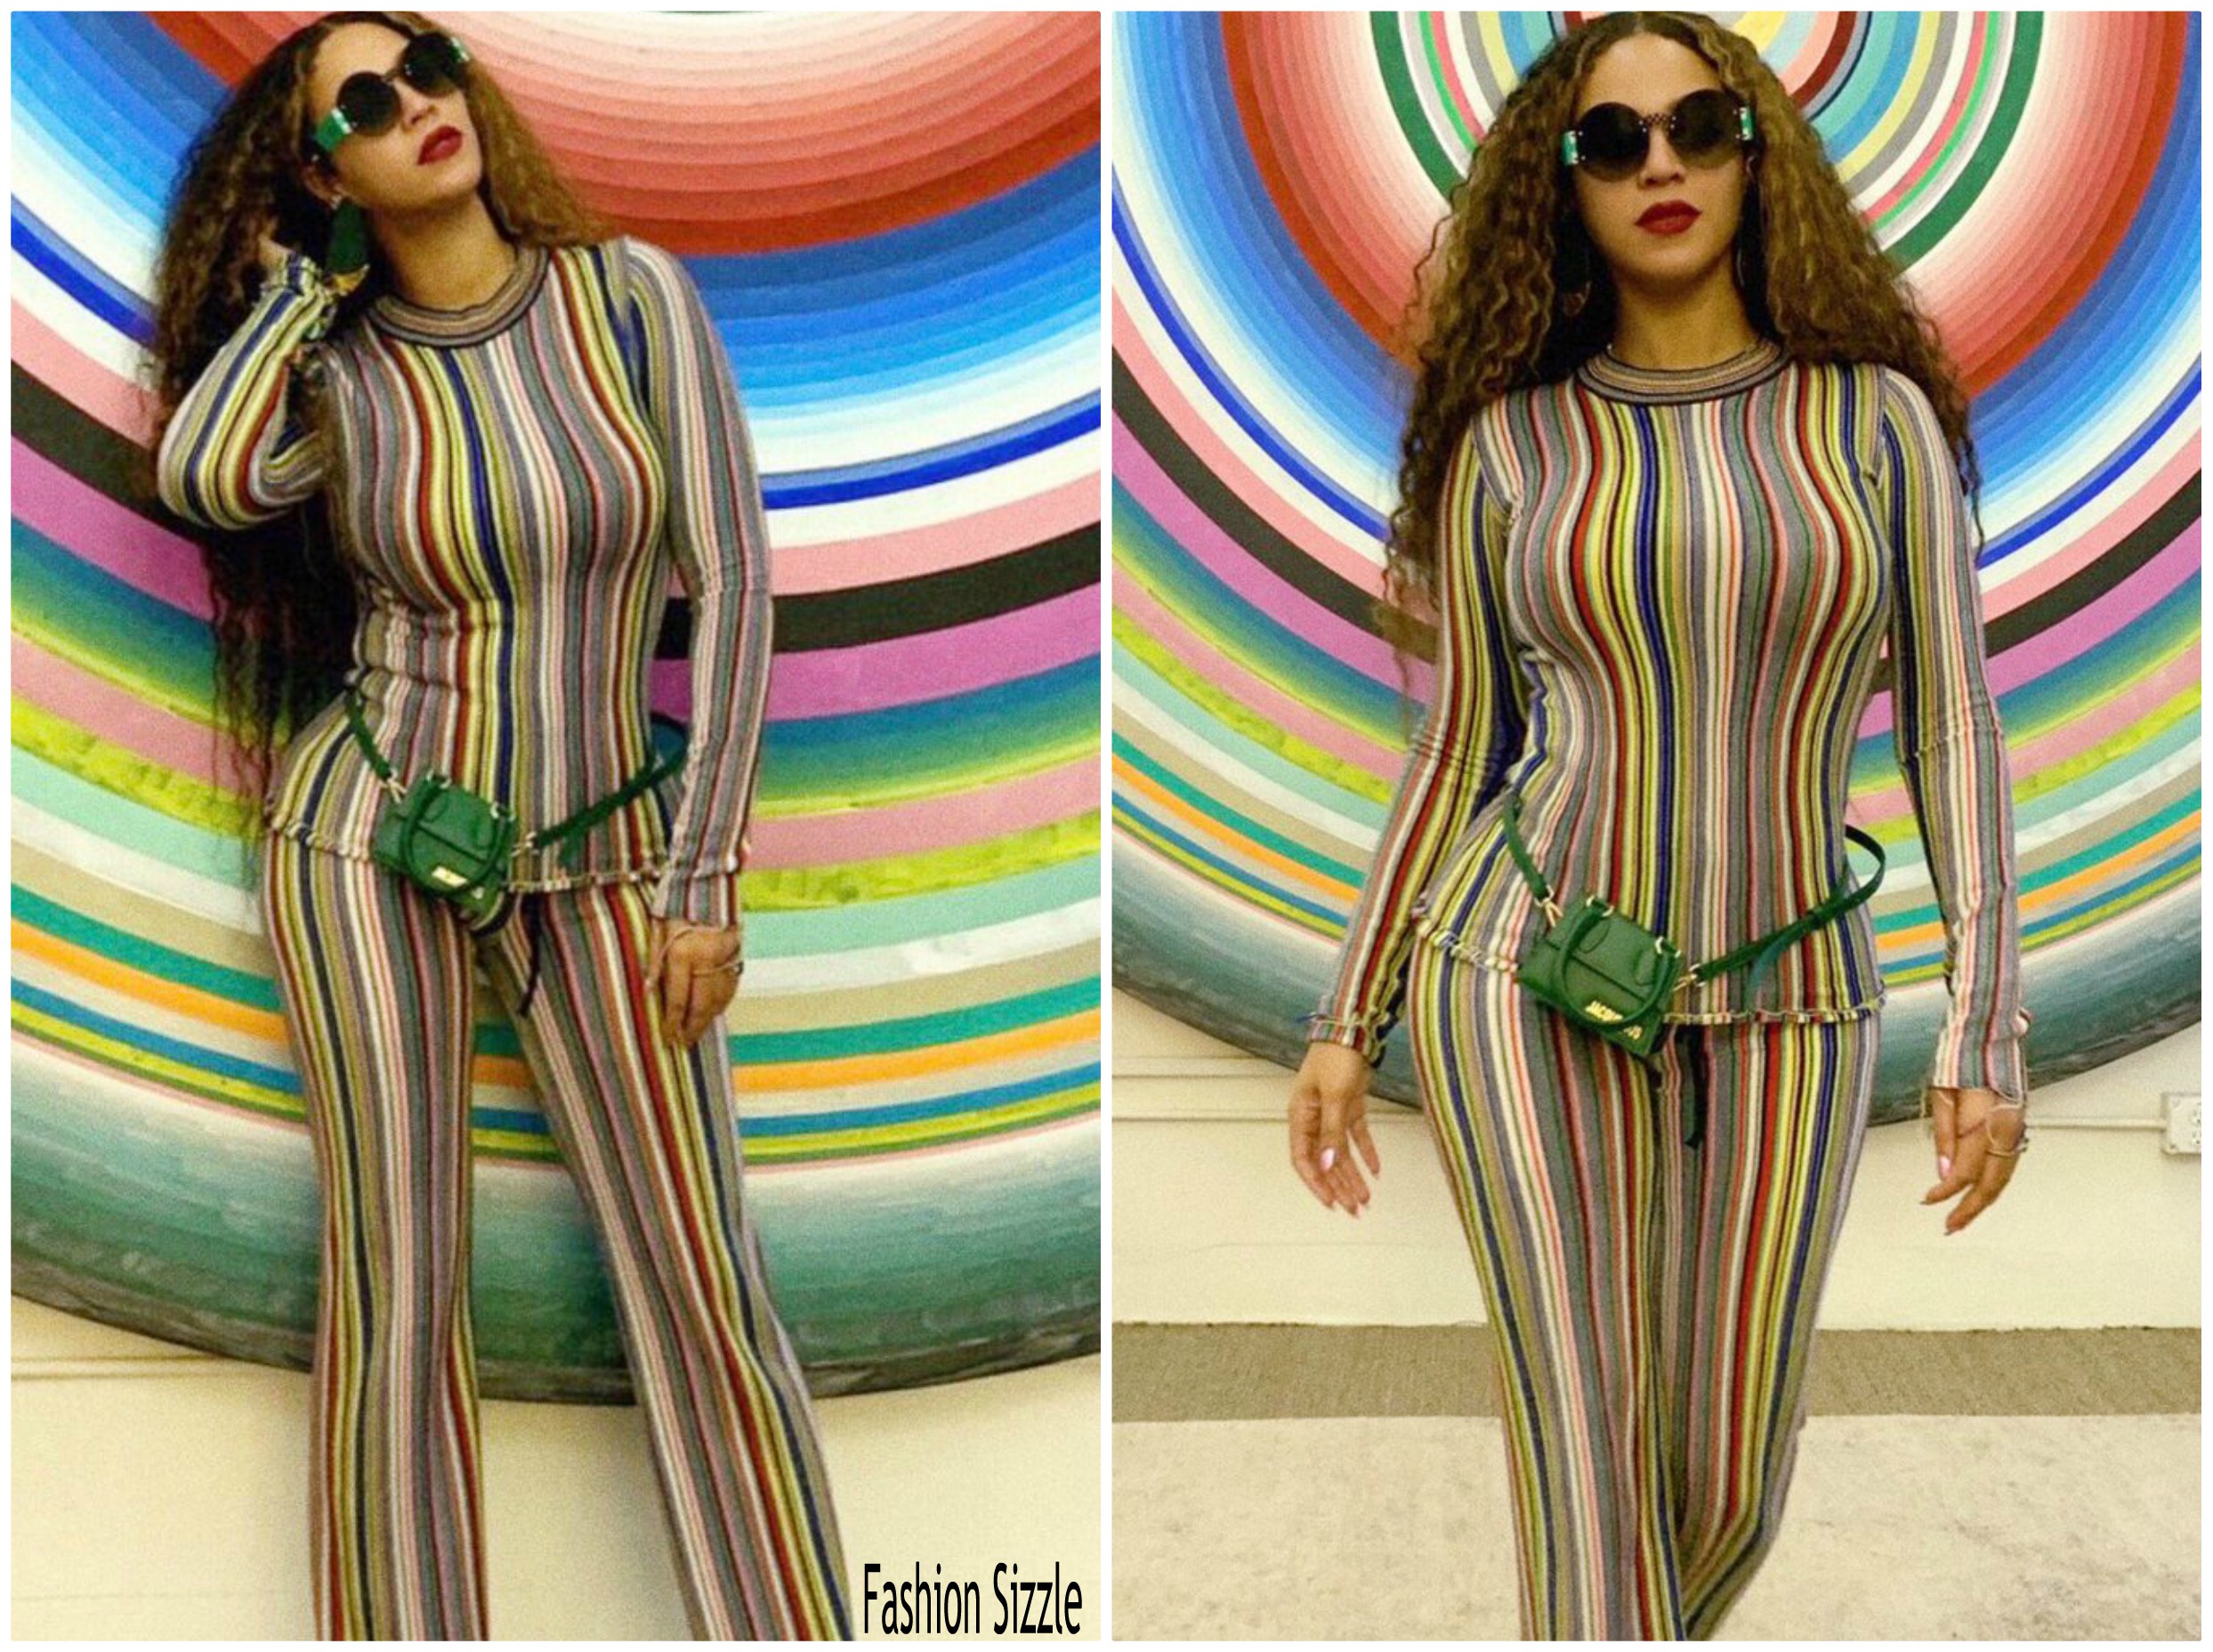 Beyonce Knowles In Marques’ Almeida - Instagram Pic - Fashionsizzle